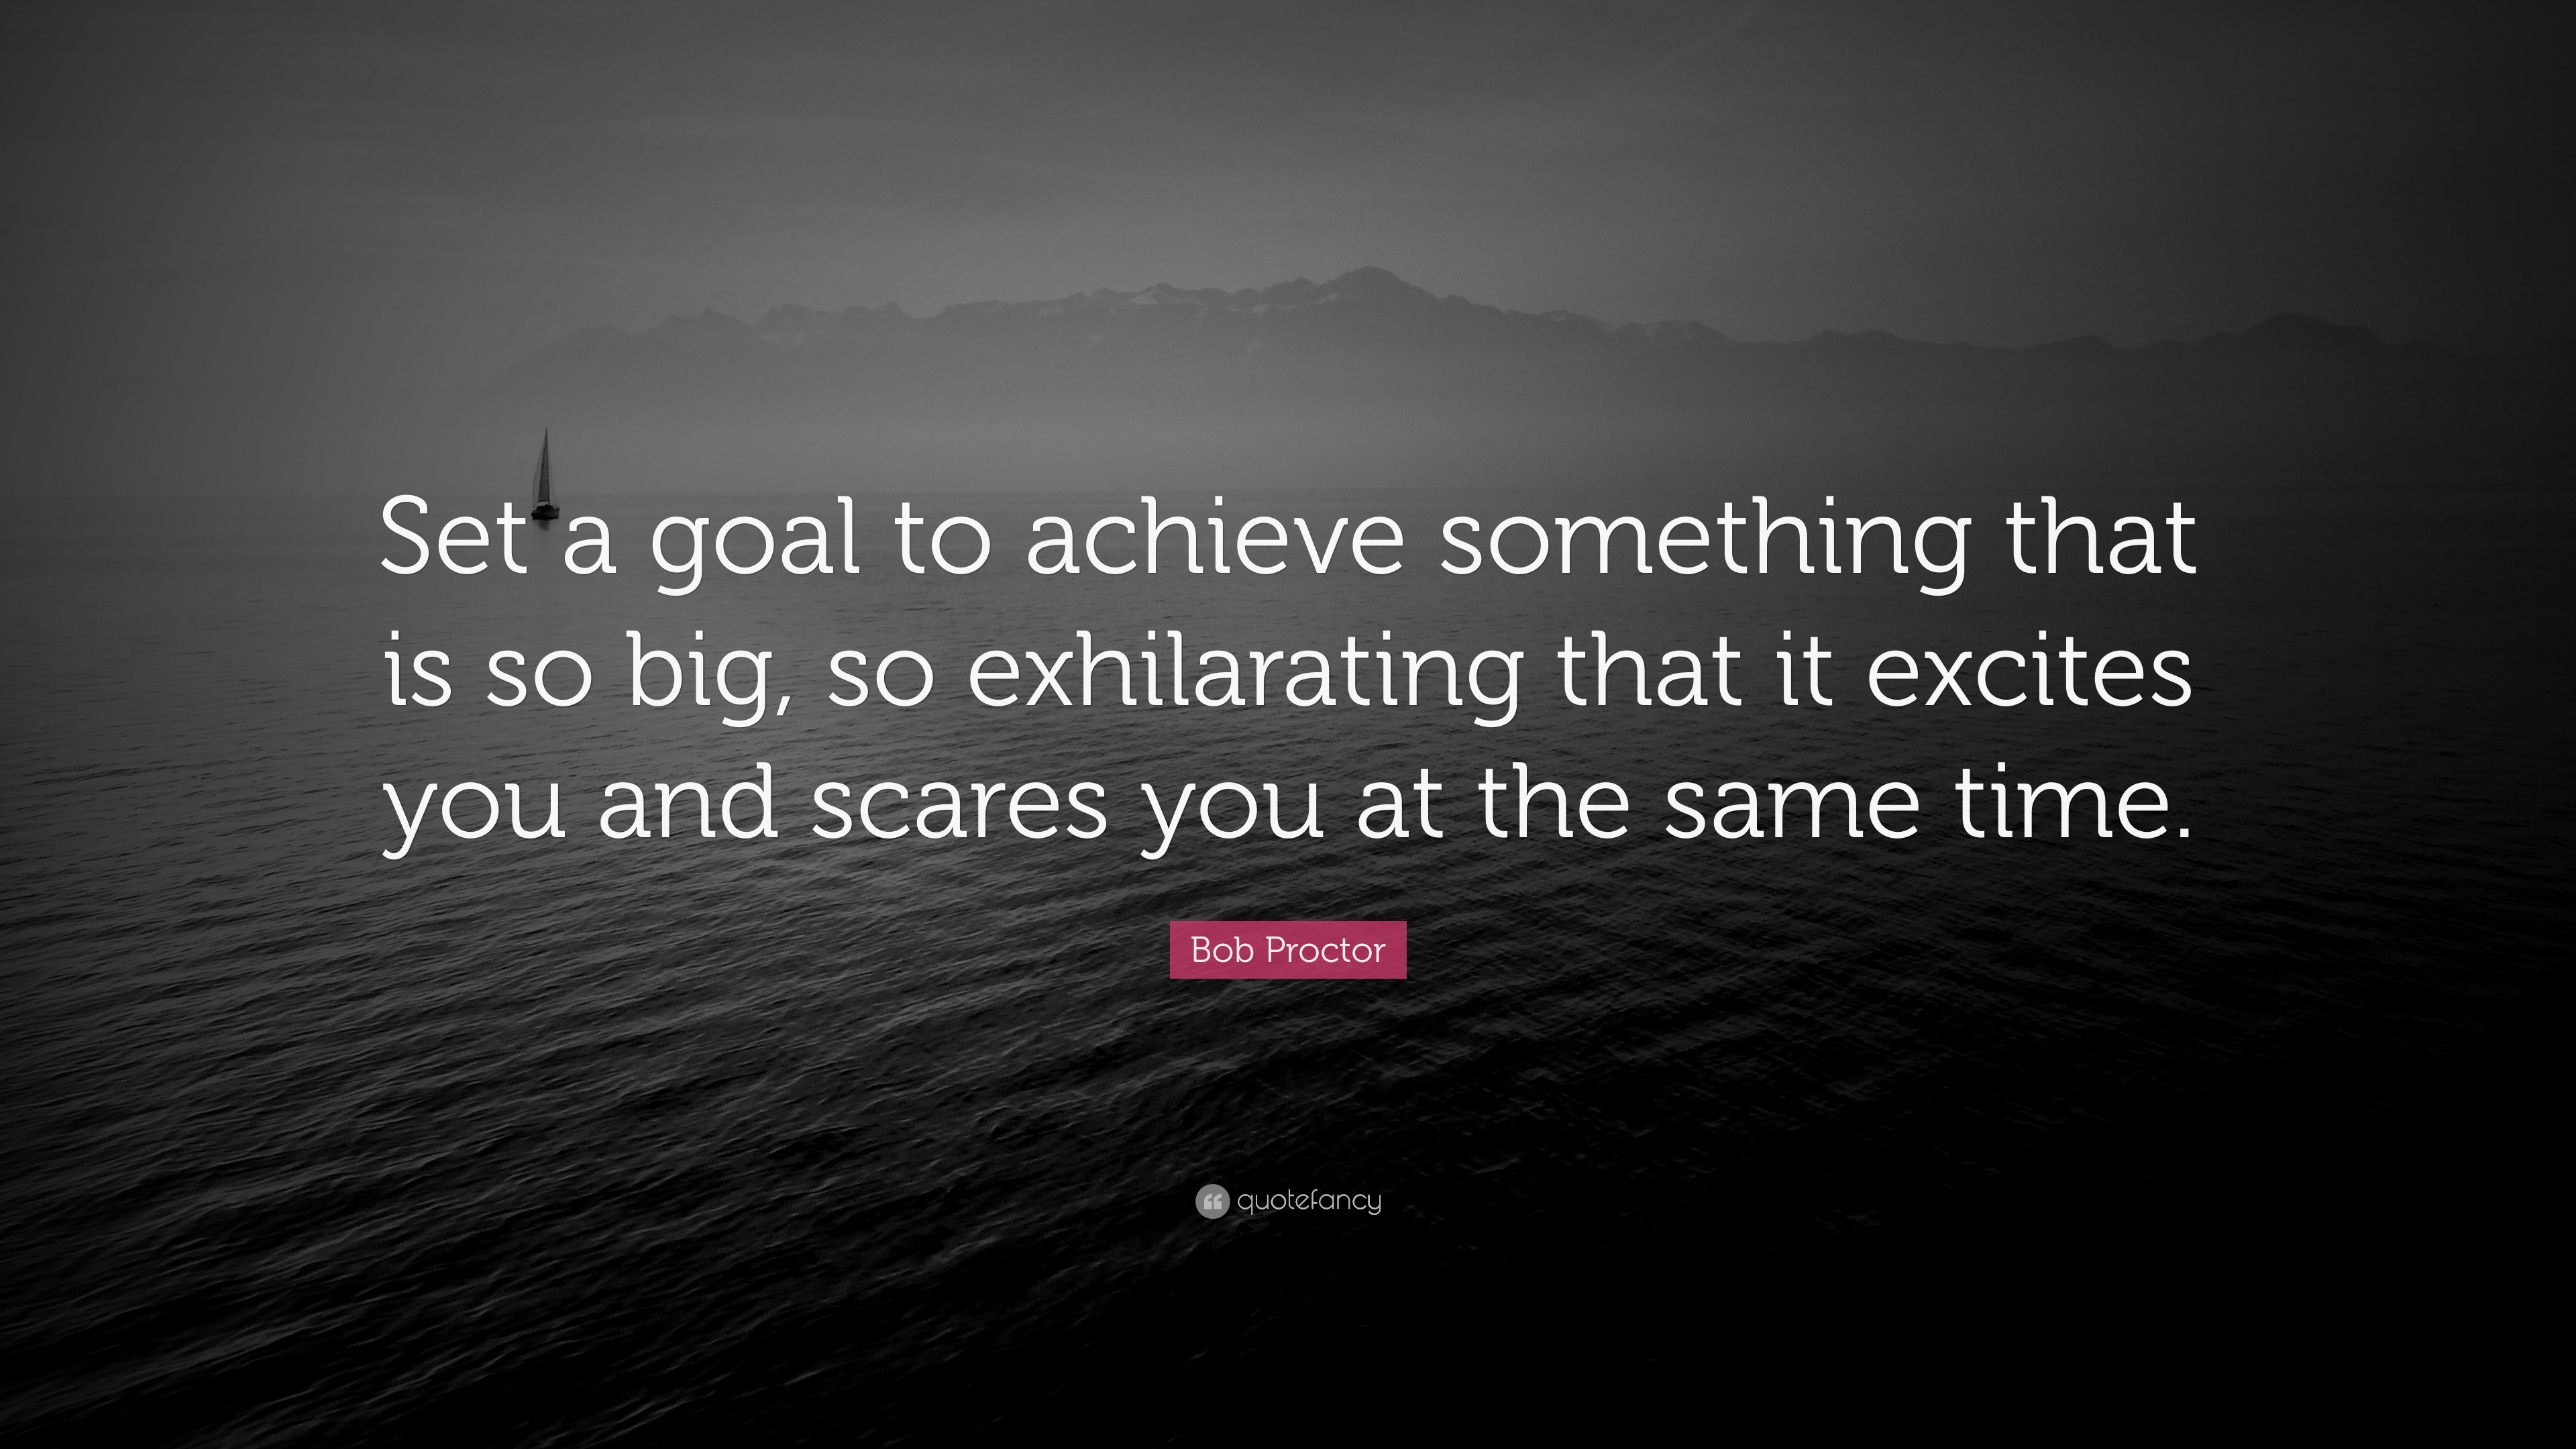 Bob Proctor Quote: "Set a goal to achieve something that ...